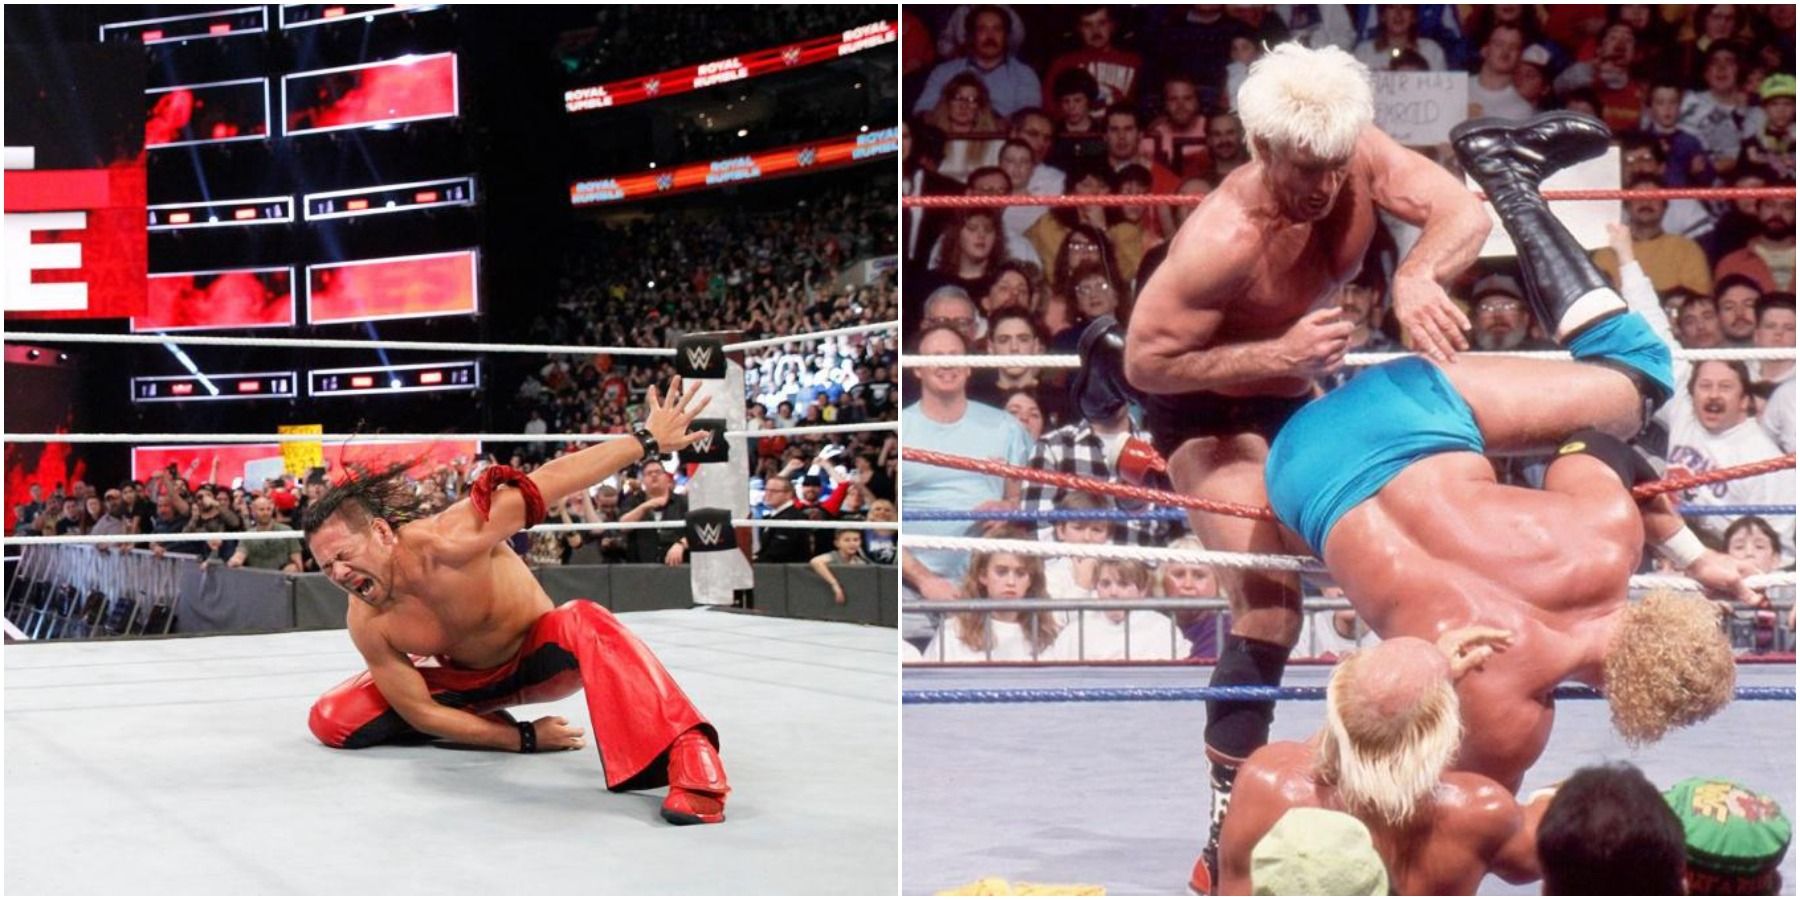 (Left) Nakamura celebrating (Right) Ric Flair throwing someone out the ring